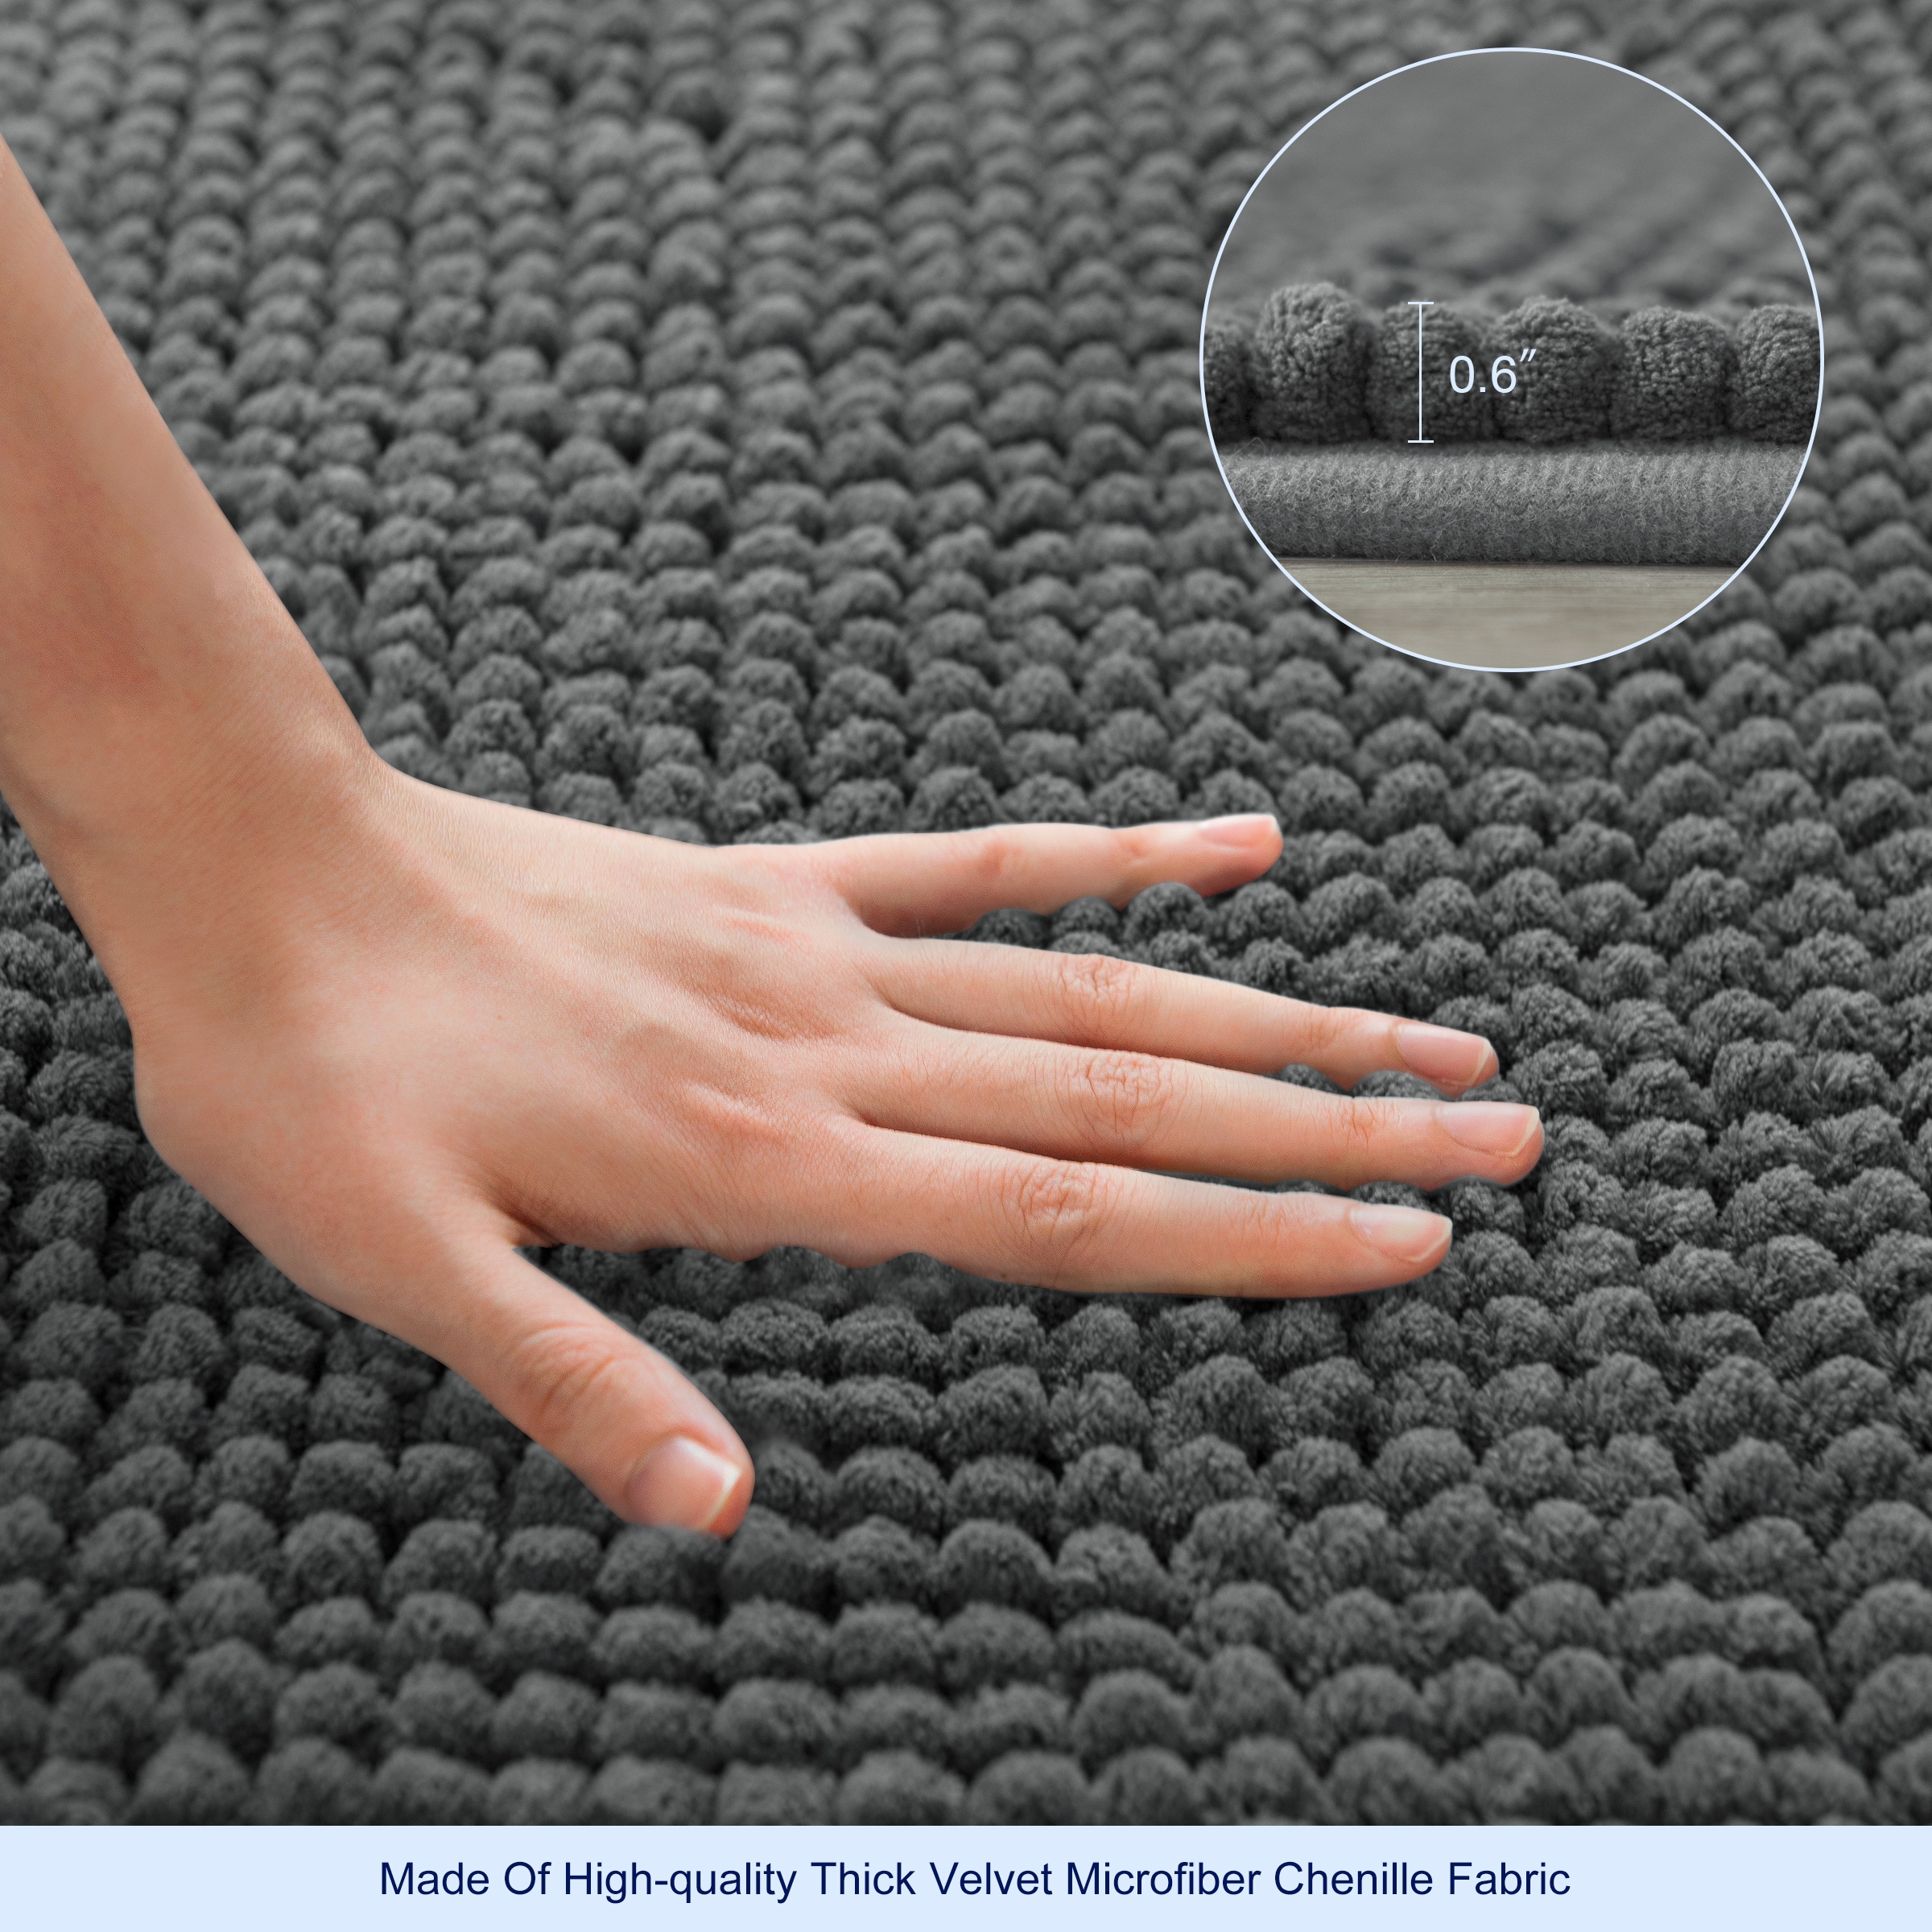 Subrtex Luxury Chenille 24-in x 60-in Gray Polyester Bath Rug in the Bathroom  Rugs & Mats department at